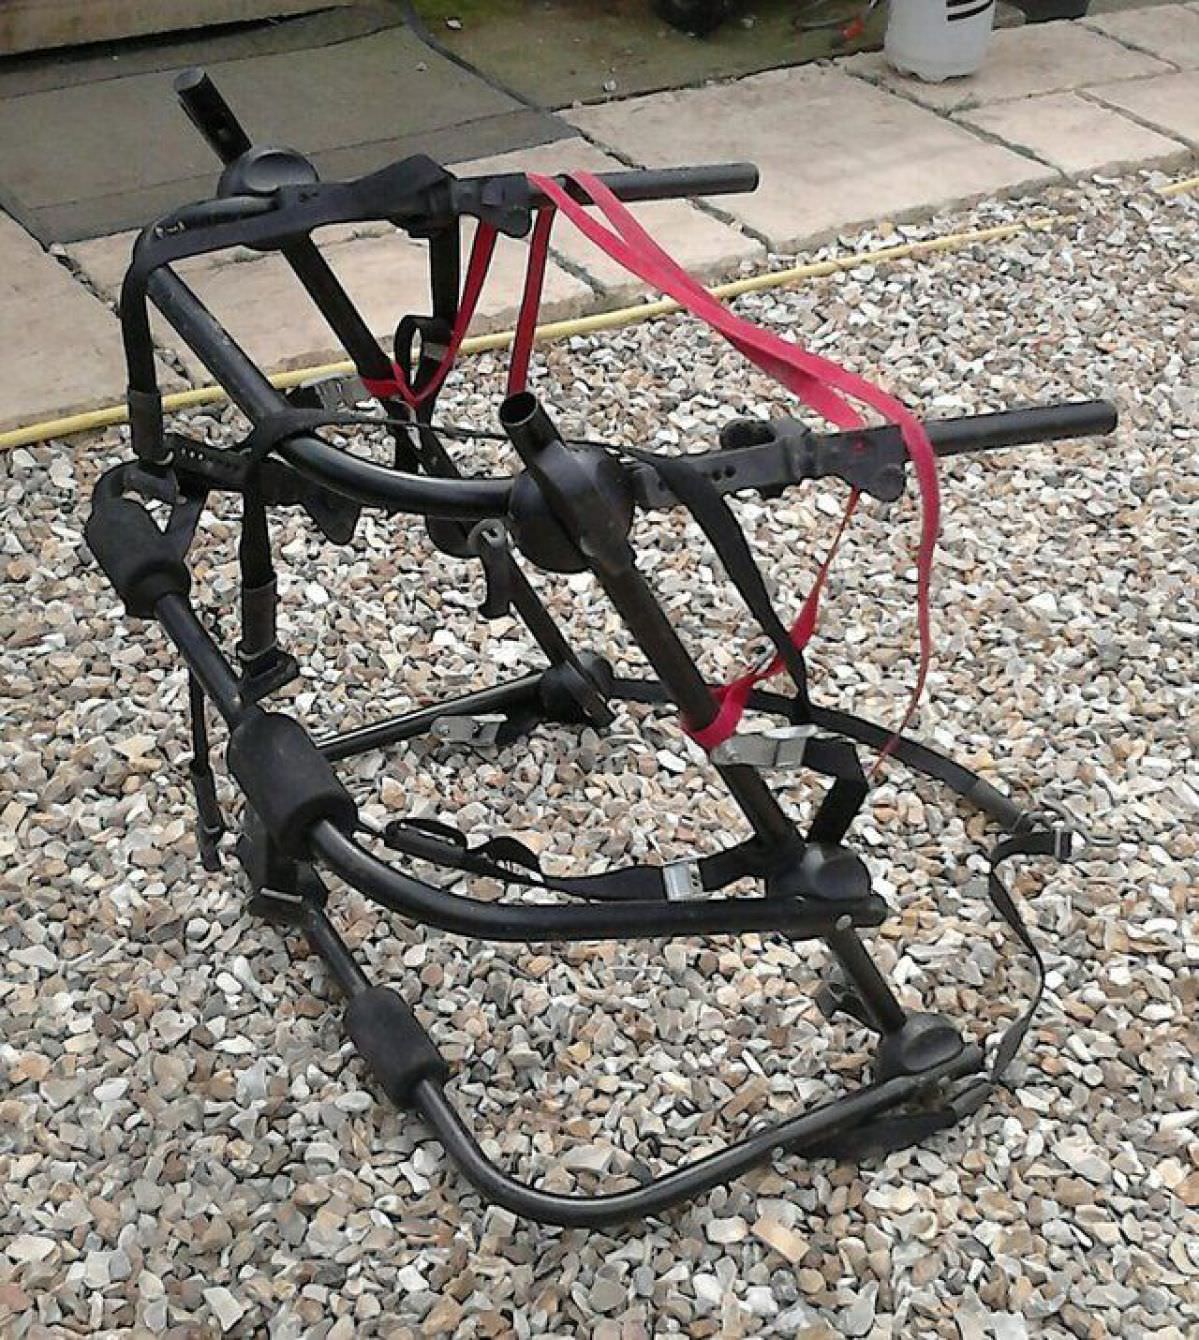 Cycle carrier for hatchback cars